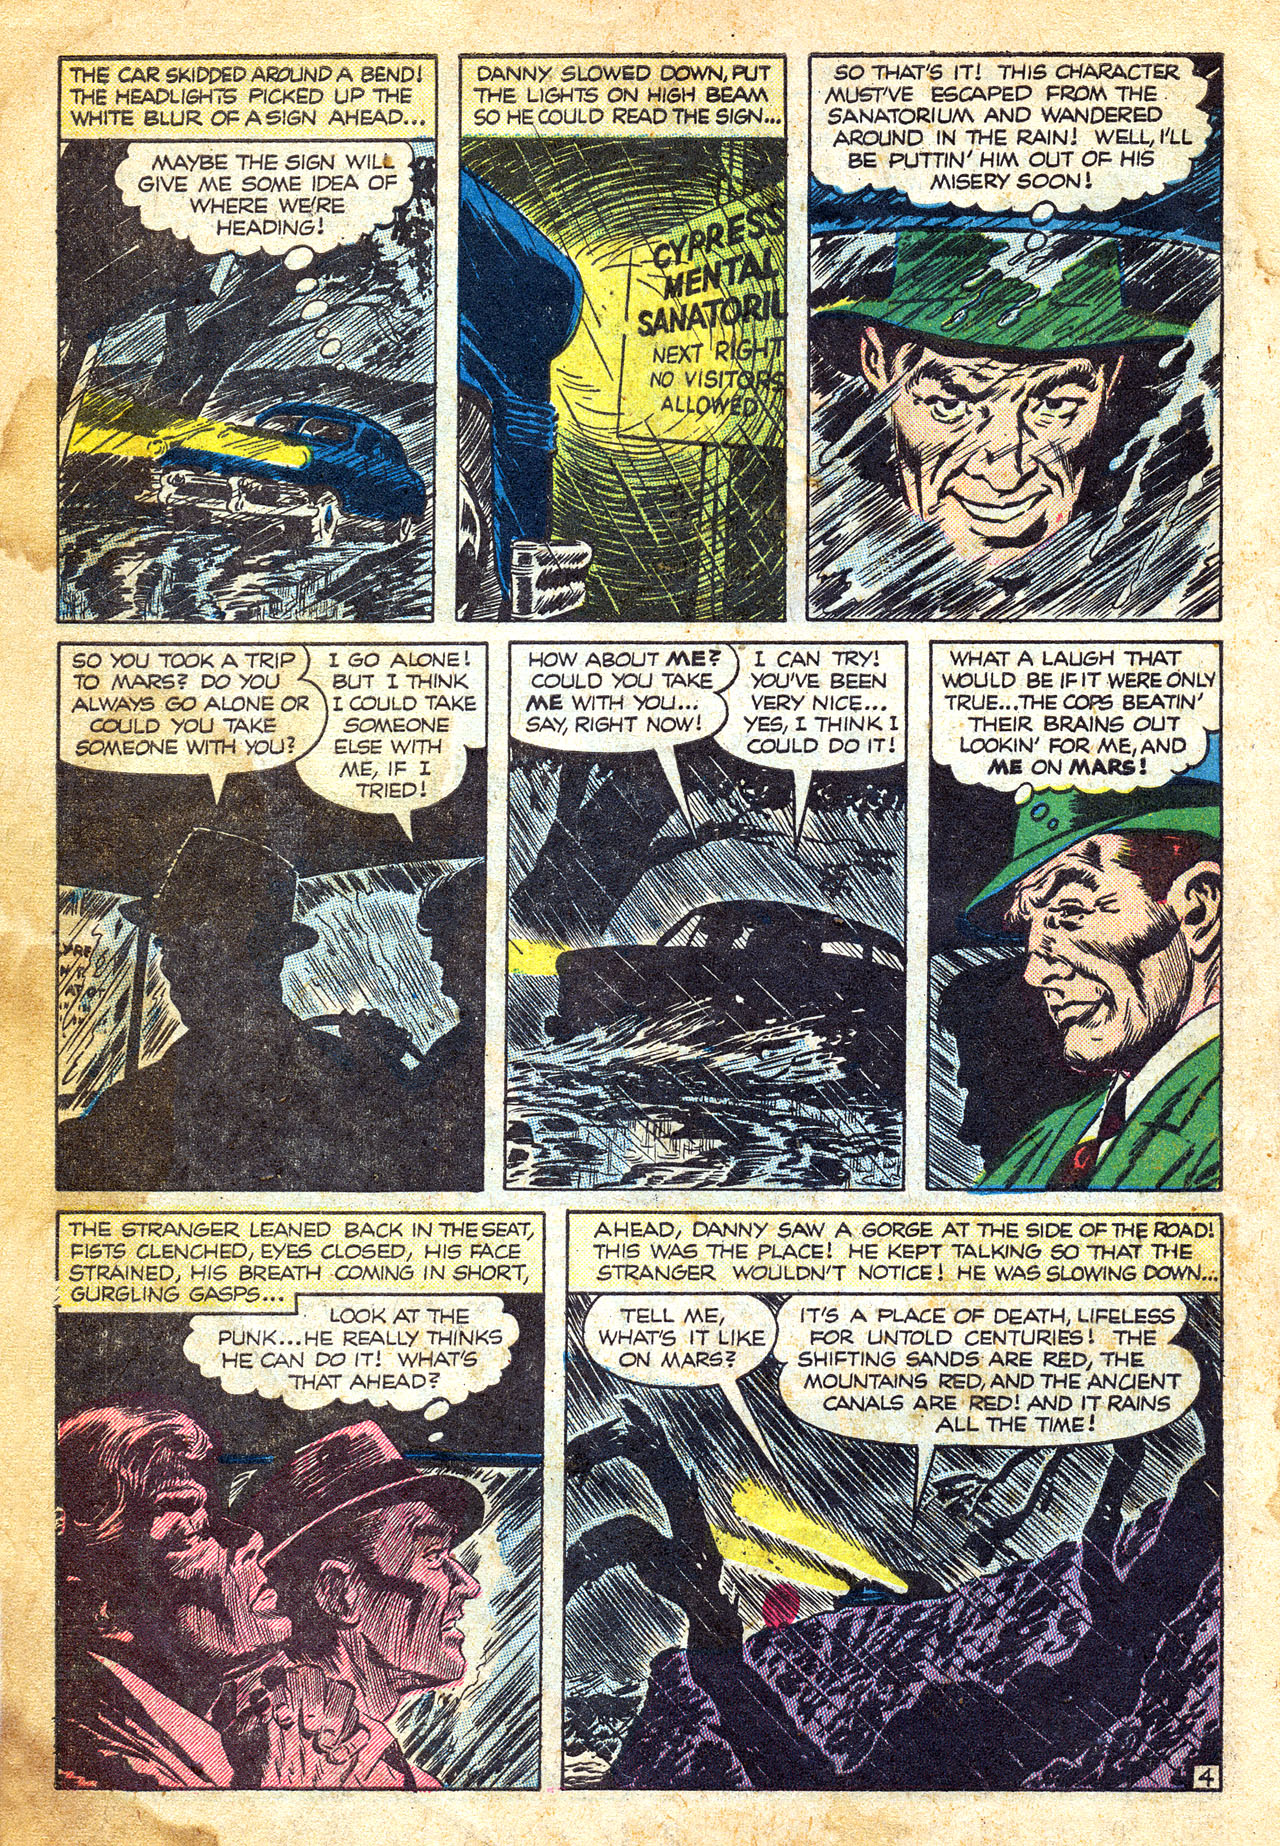 Marvel Tales (1949) 123 Page 5